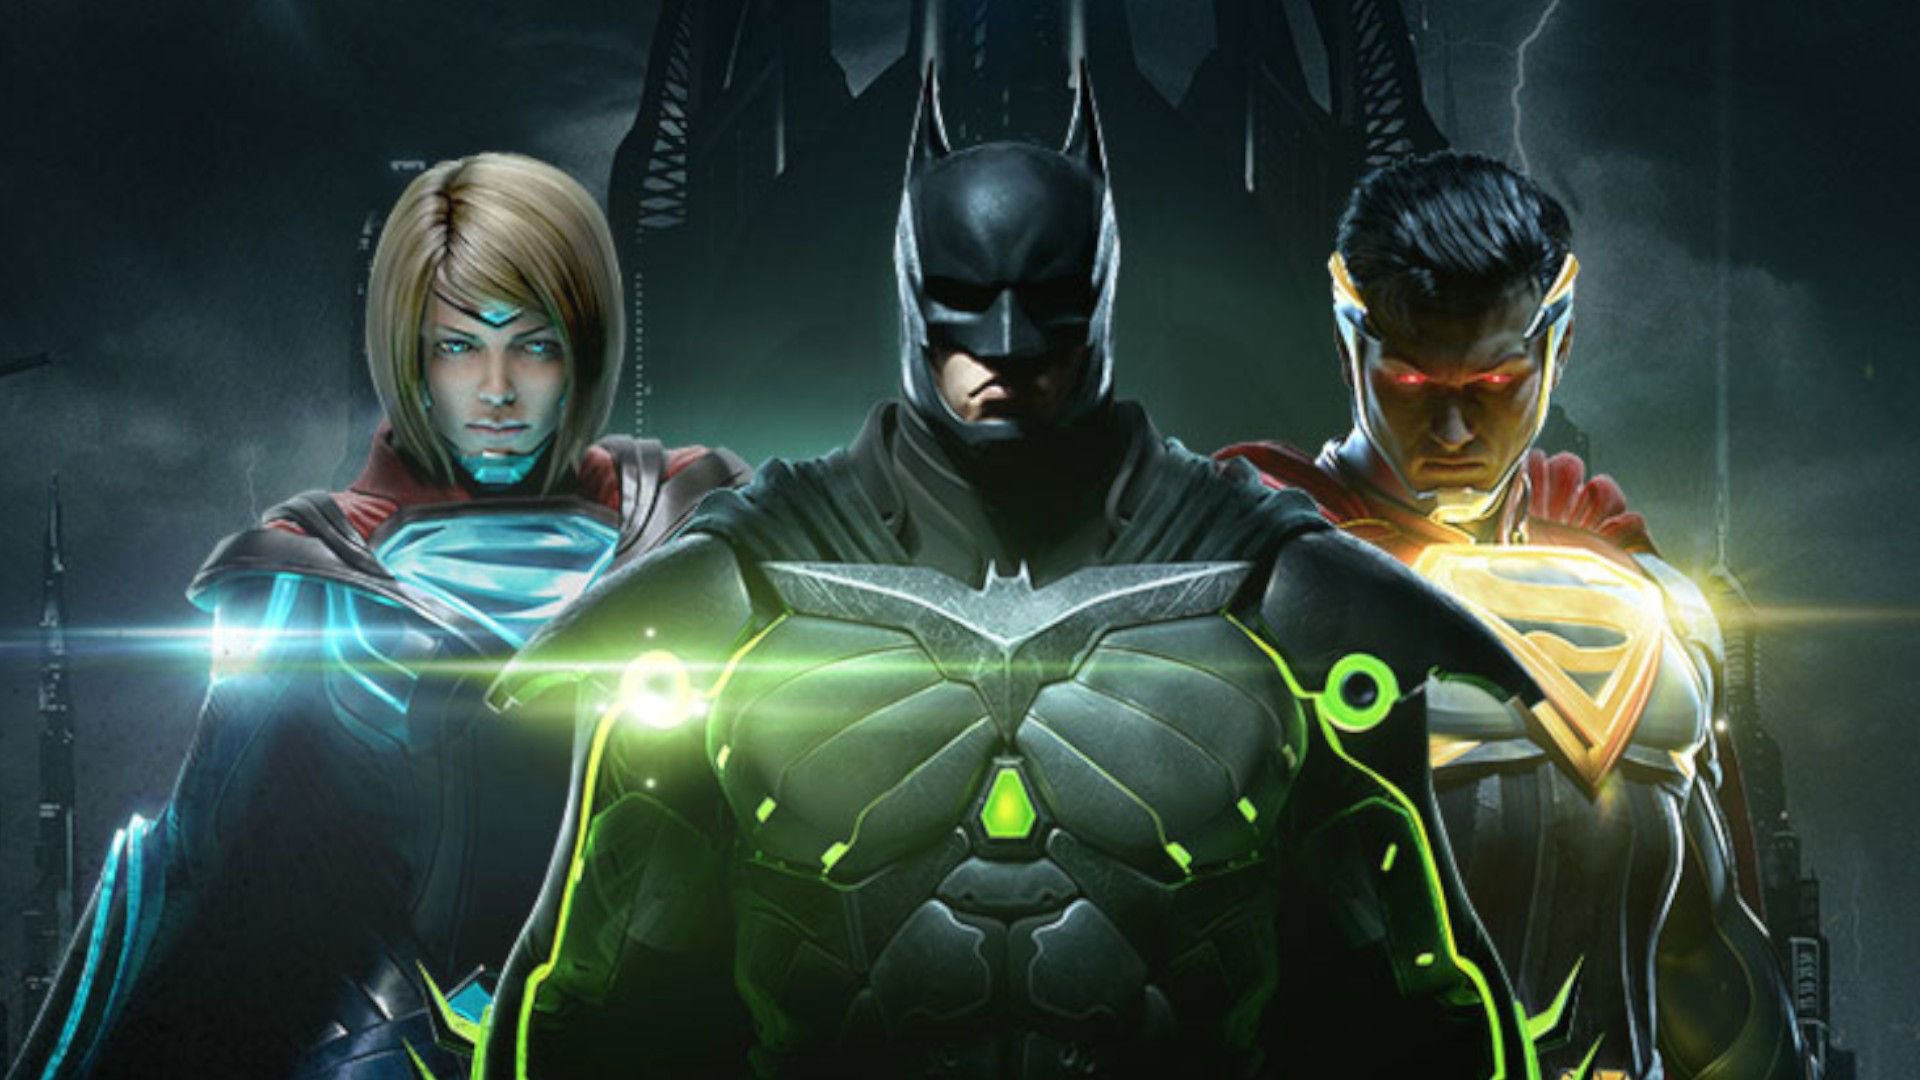 mortal-kombat-1-s-kameo-system-might-restore-hope-for-crossover-characters-like-batman